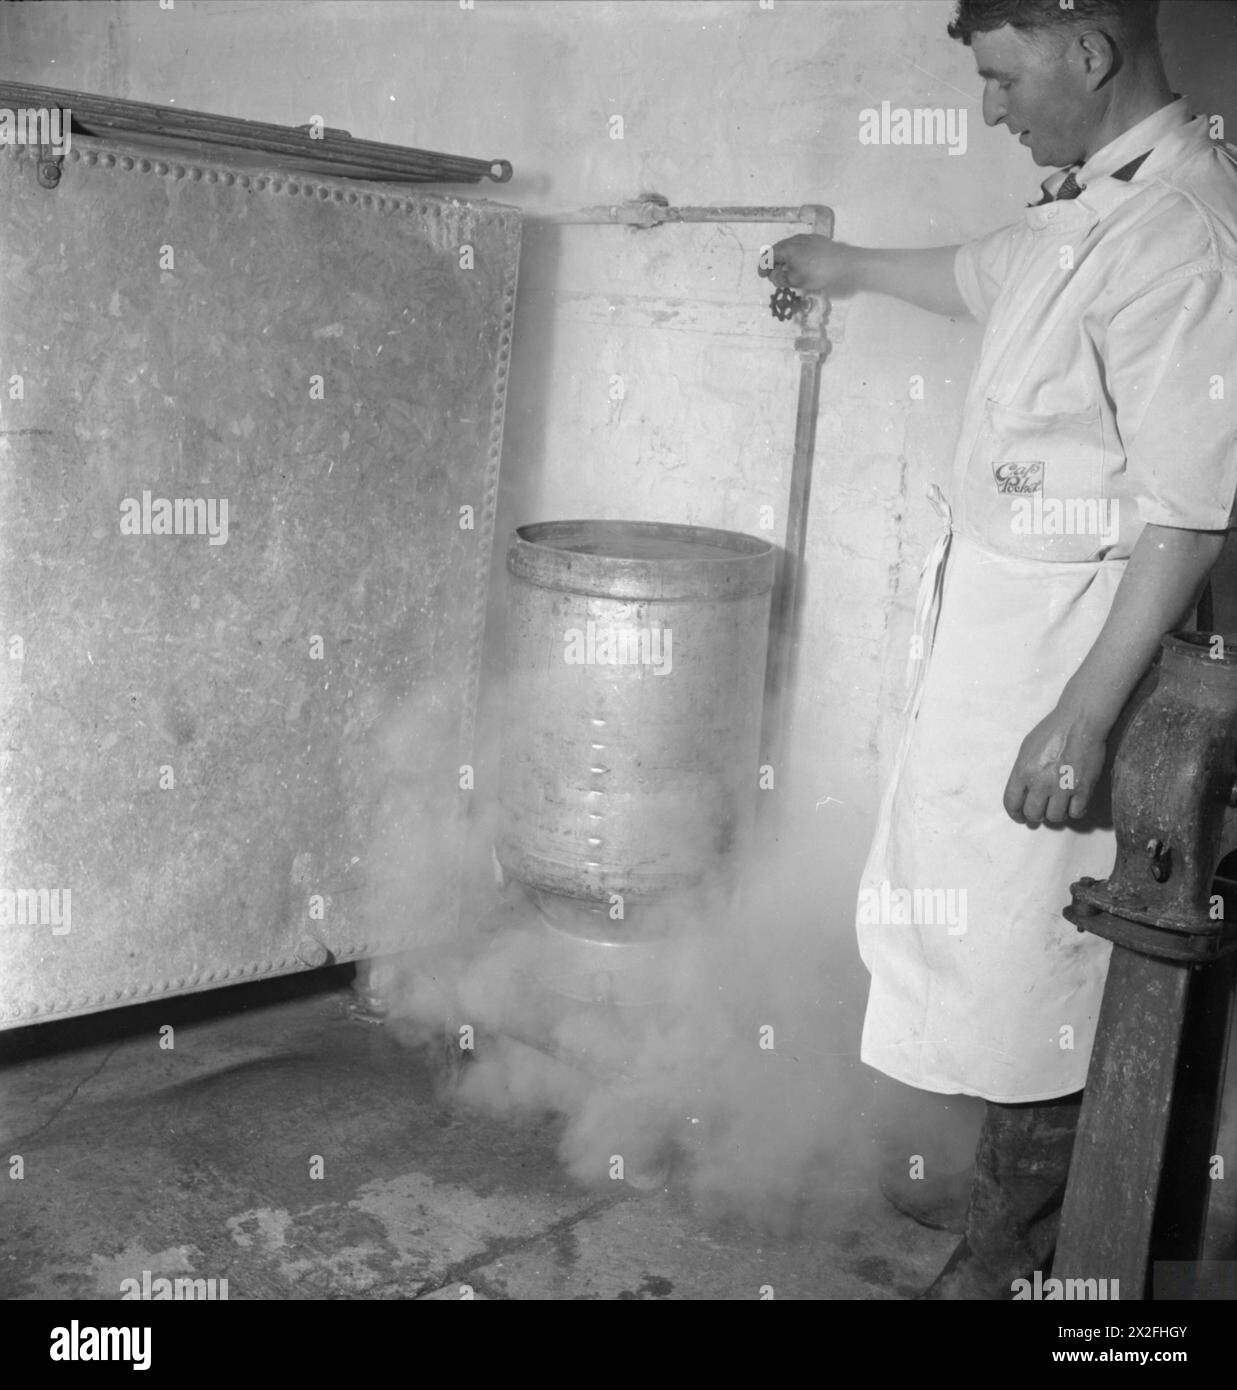 MILK PRODUCTION: DAIRY FARMING IN WARTIME, NORFOLK, ENGLAND, UK, 1944 - Milk churns are sterilised by steam at a dairy farm, somewhere in Norfolk. The original caption states that 'unless this precaution is taken milk may be contaminated by placing it in unsterile churns, thus nullifying the good effects of careful and clean methods of production' Stock Photo